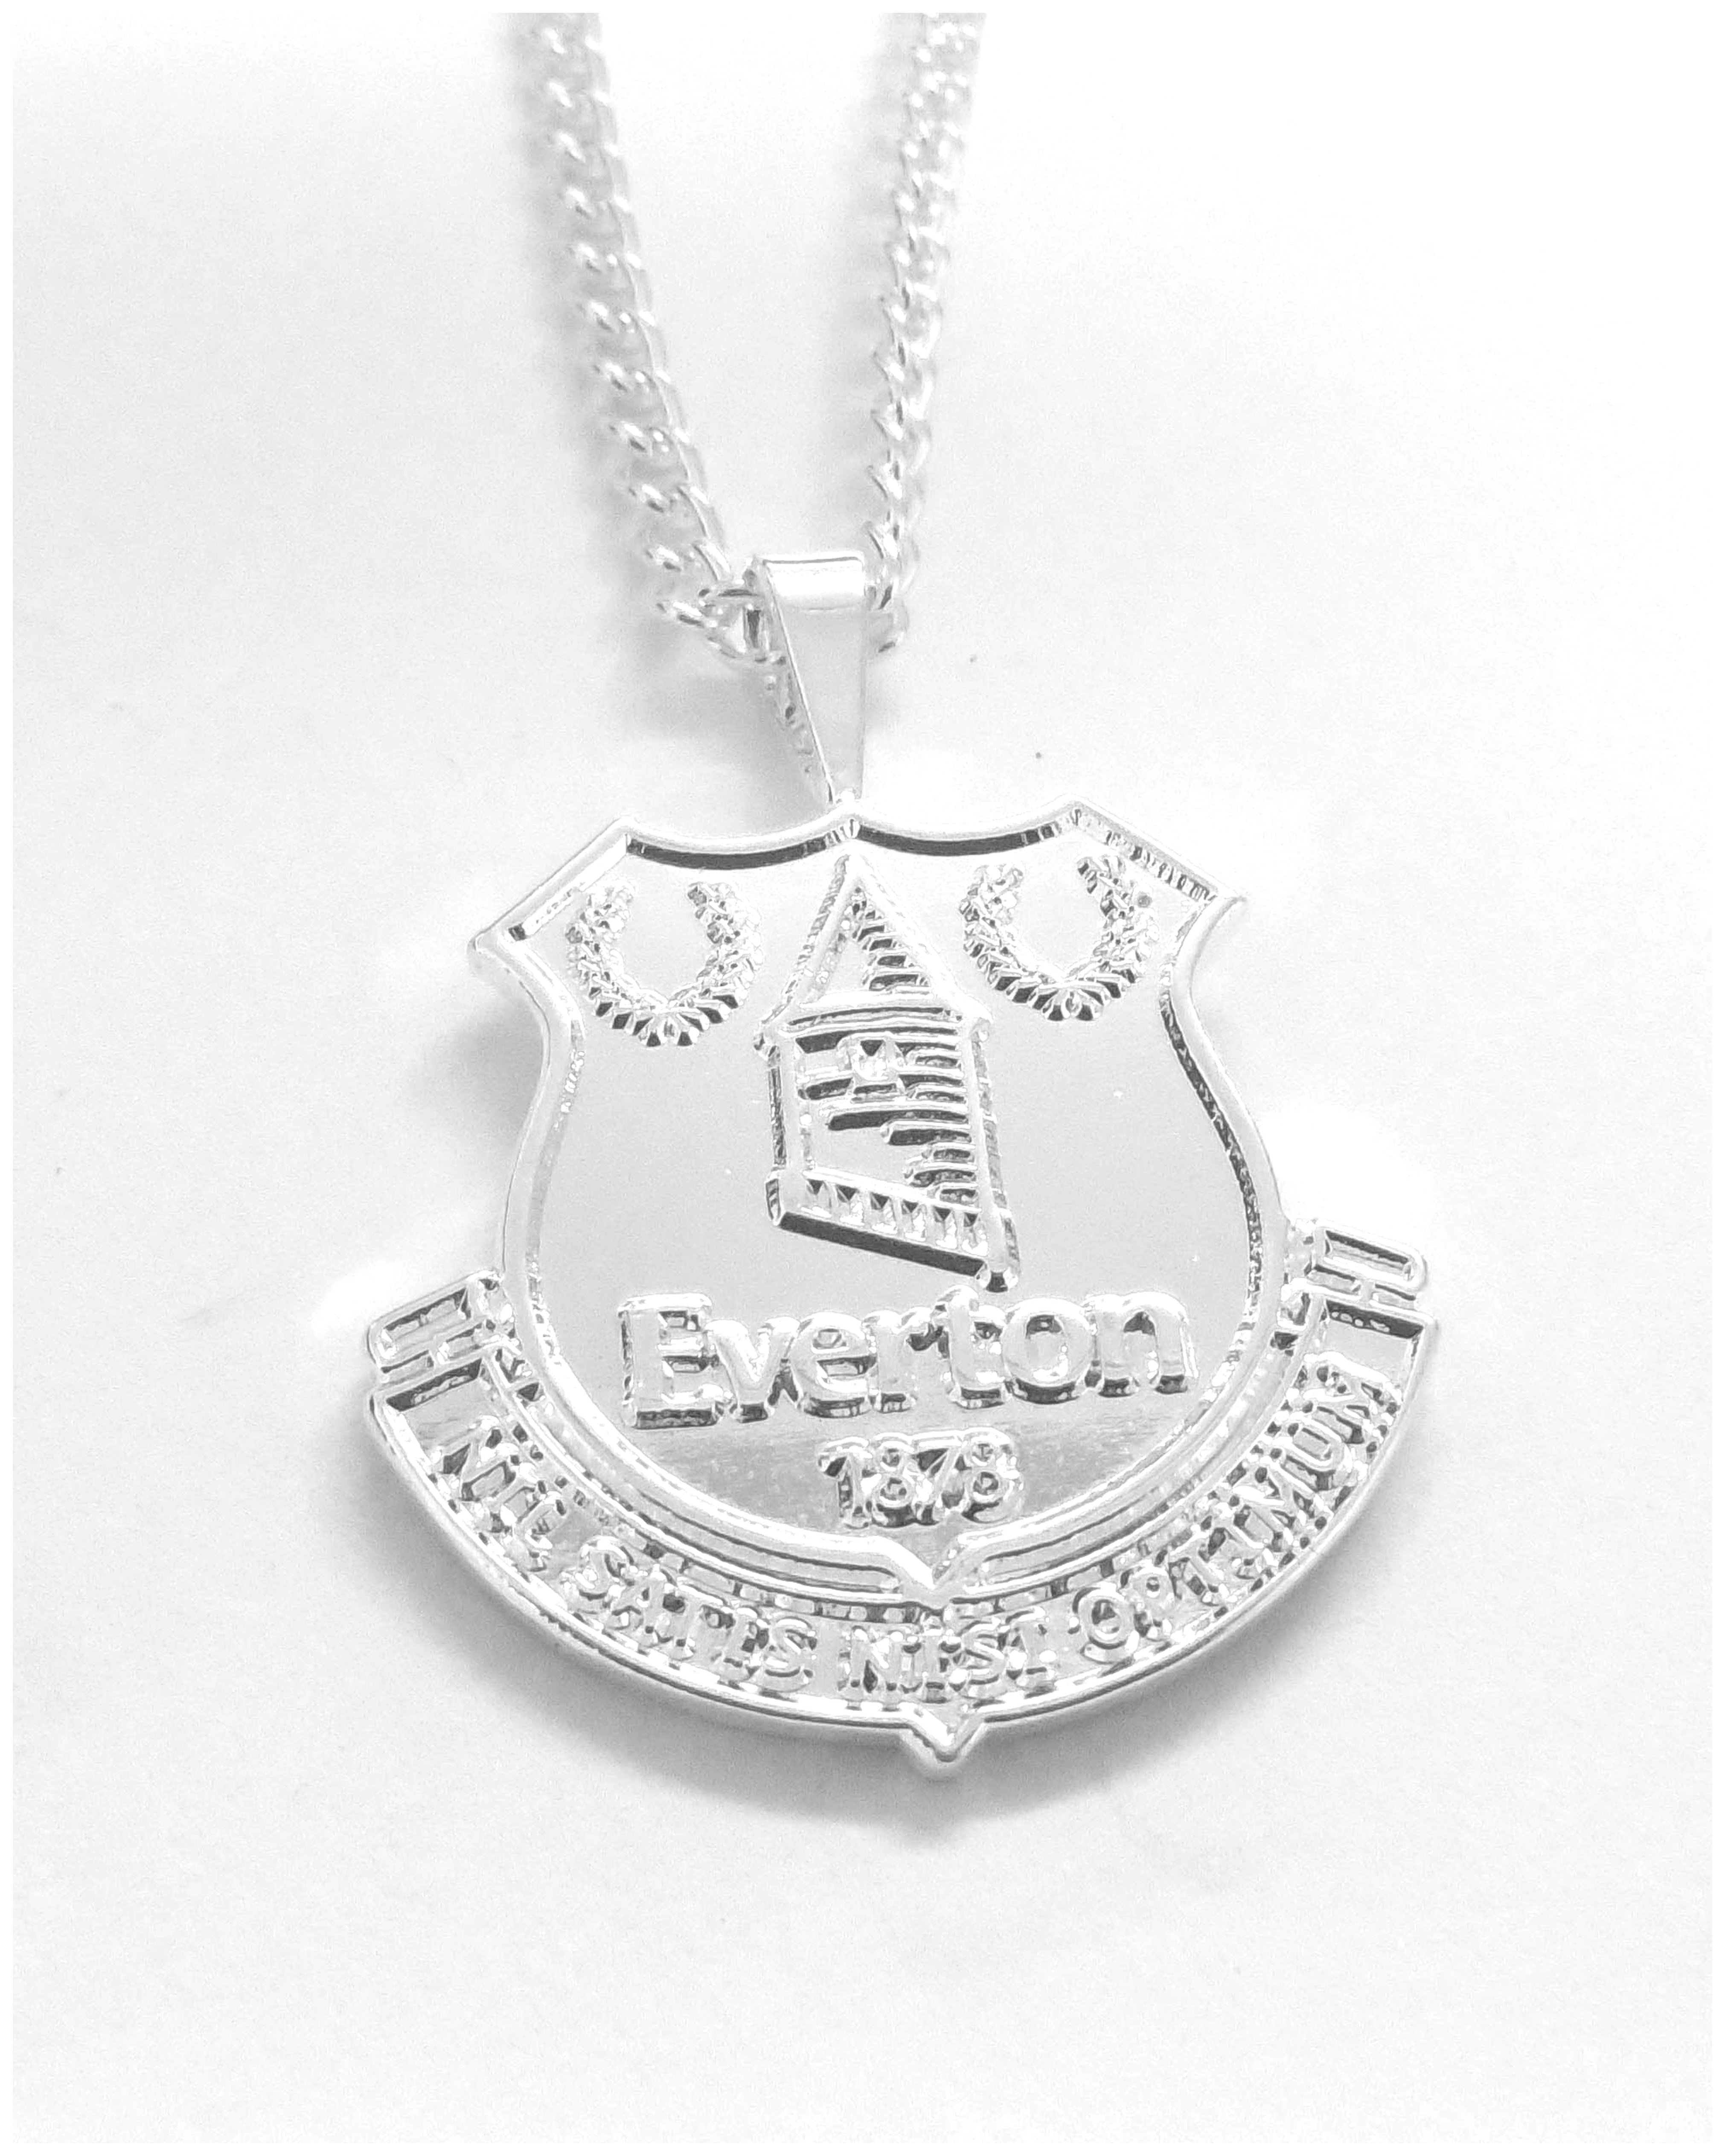 Silver Plated Everton Pendant and Chain.